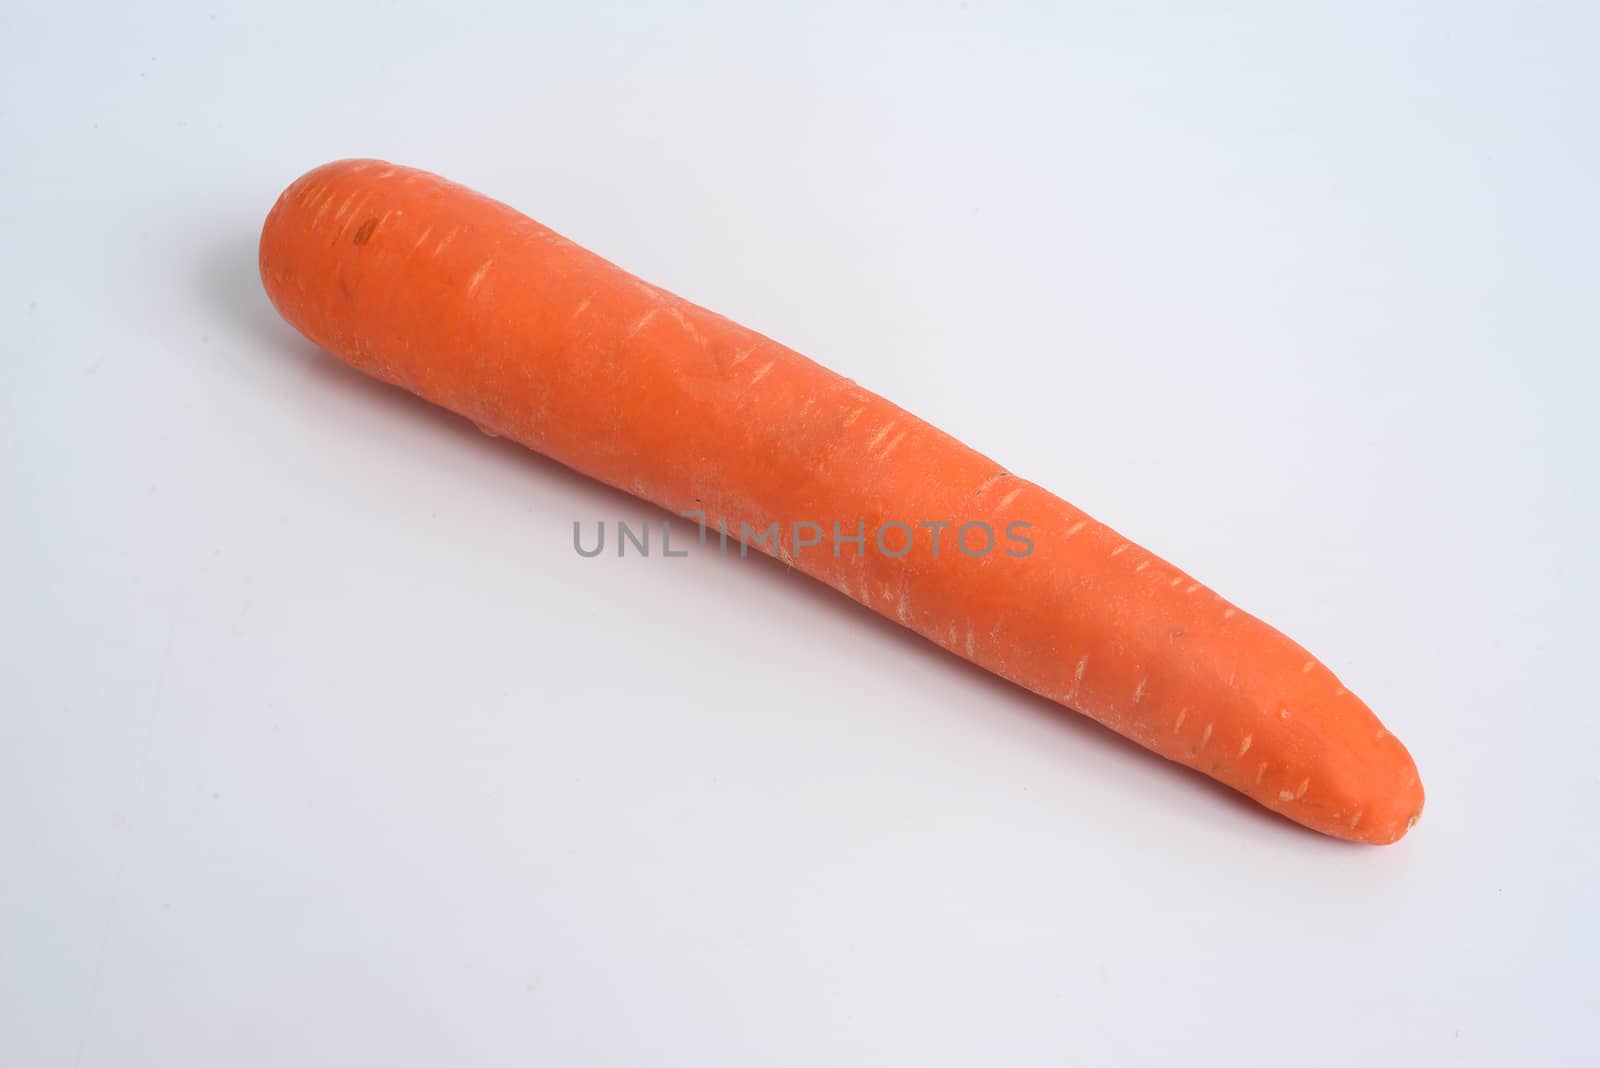 The carrot (Daucus carota subsp. sativus) is a root vegetable, usually orange in colour, with copy space for text